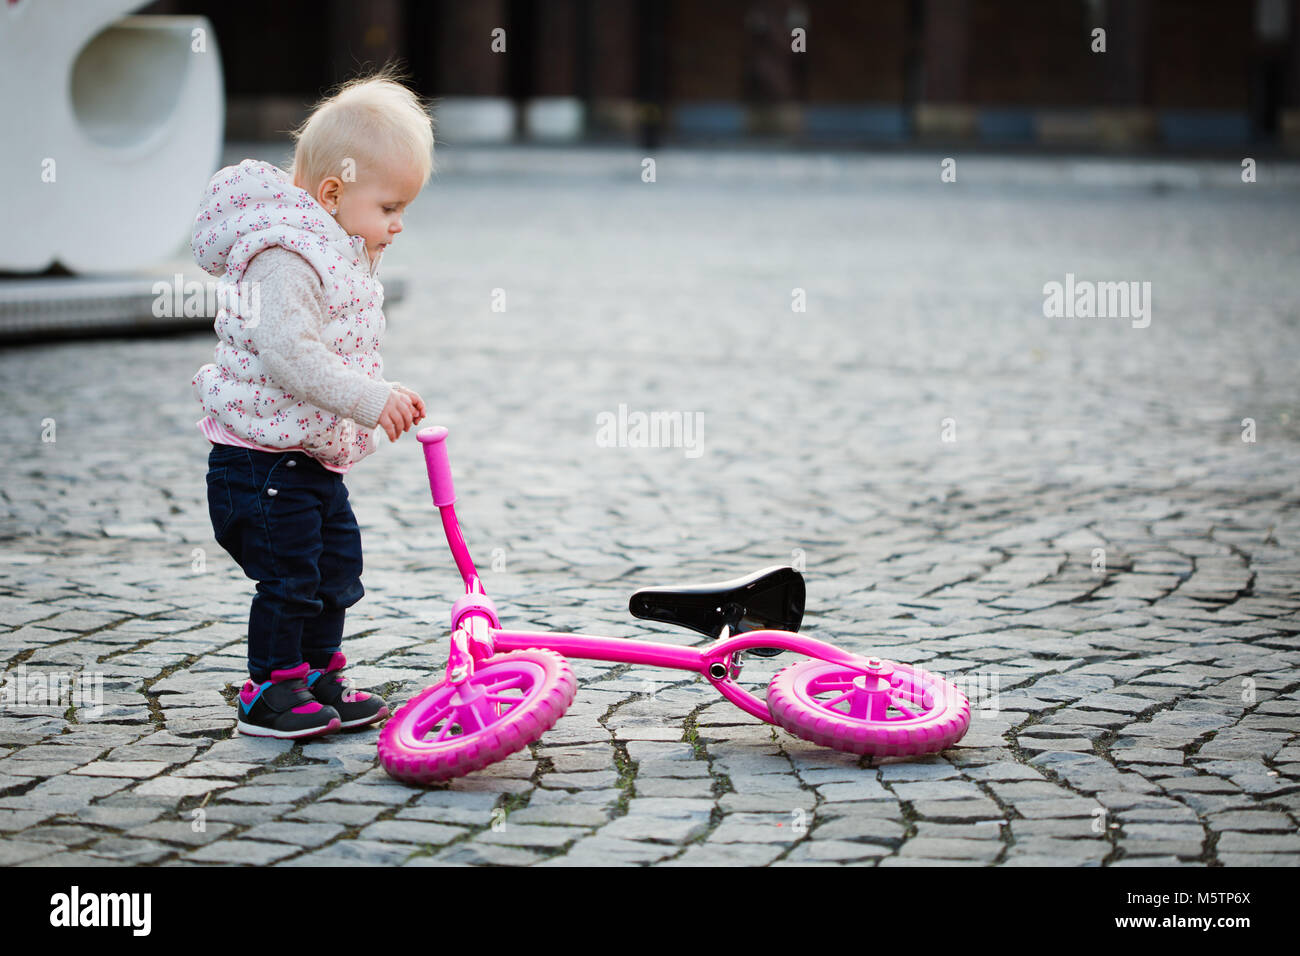 Focused little girl to ride balance bike outdoors, cute small baby trying bicycle Stock Photo